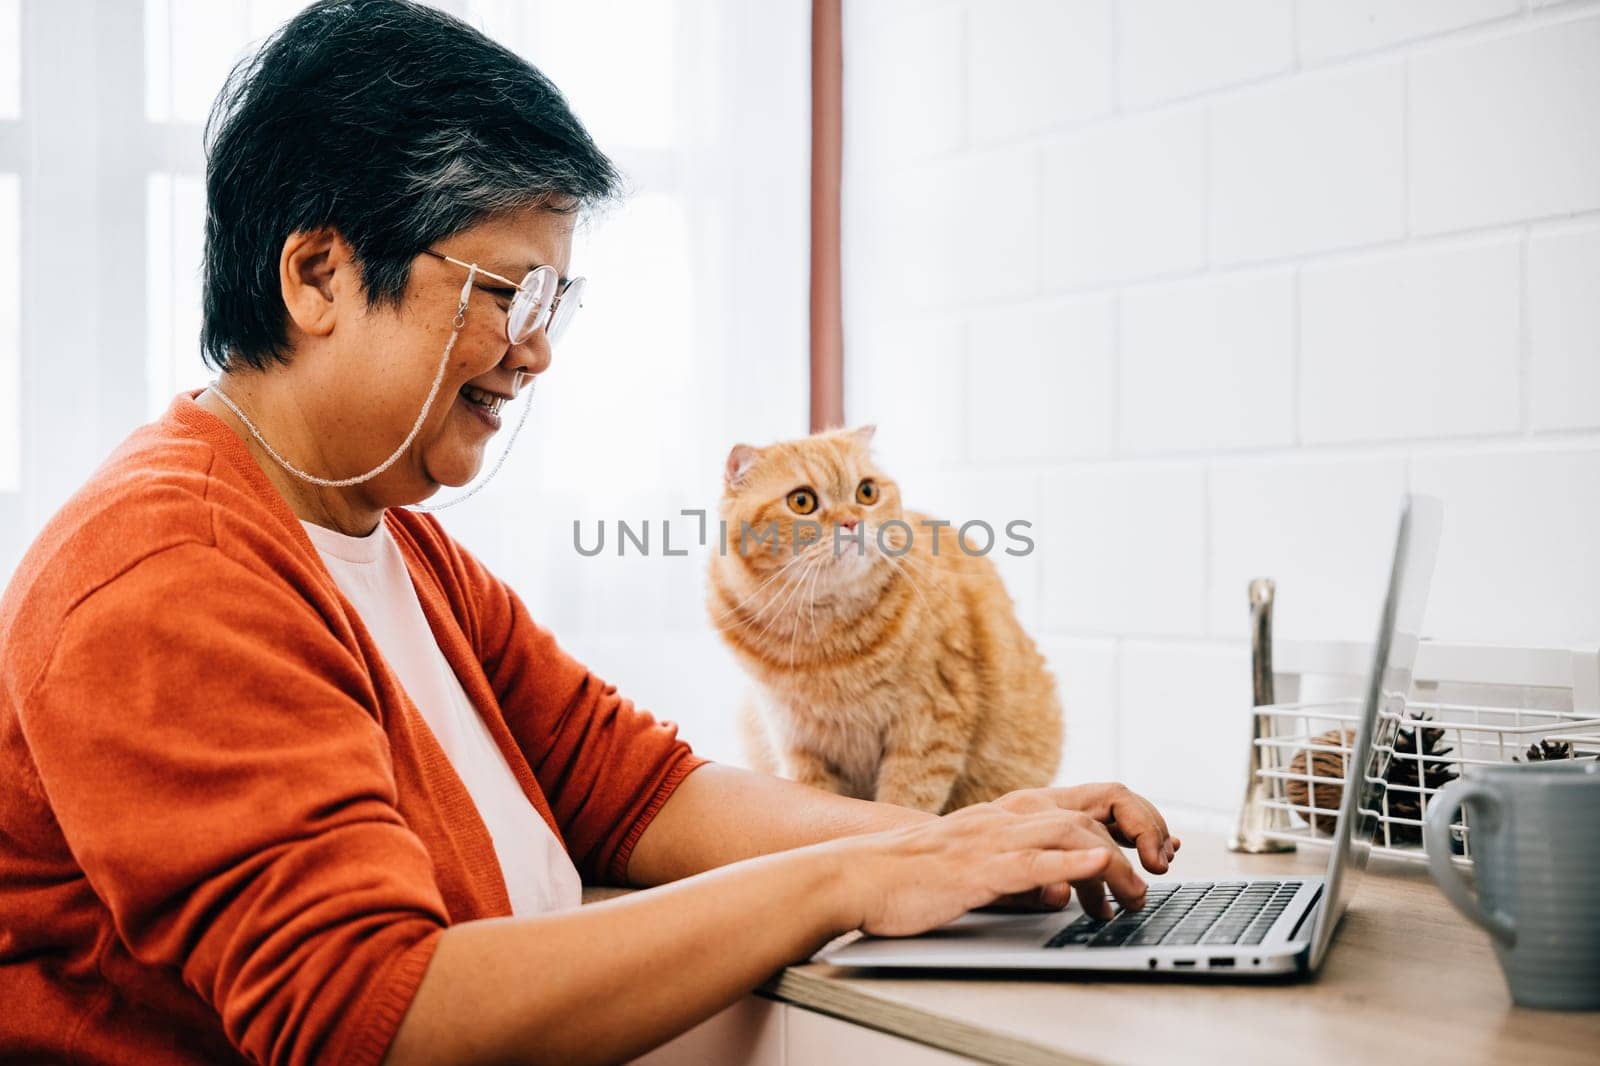 A woman works on her laptop at her desk in the morning, with her elderly cat looking on. Their friendship and togetherness create a heartwarming atmosphere of relaxation and productivity. pet love